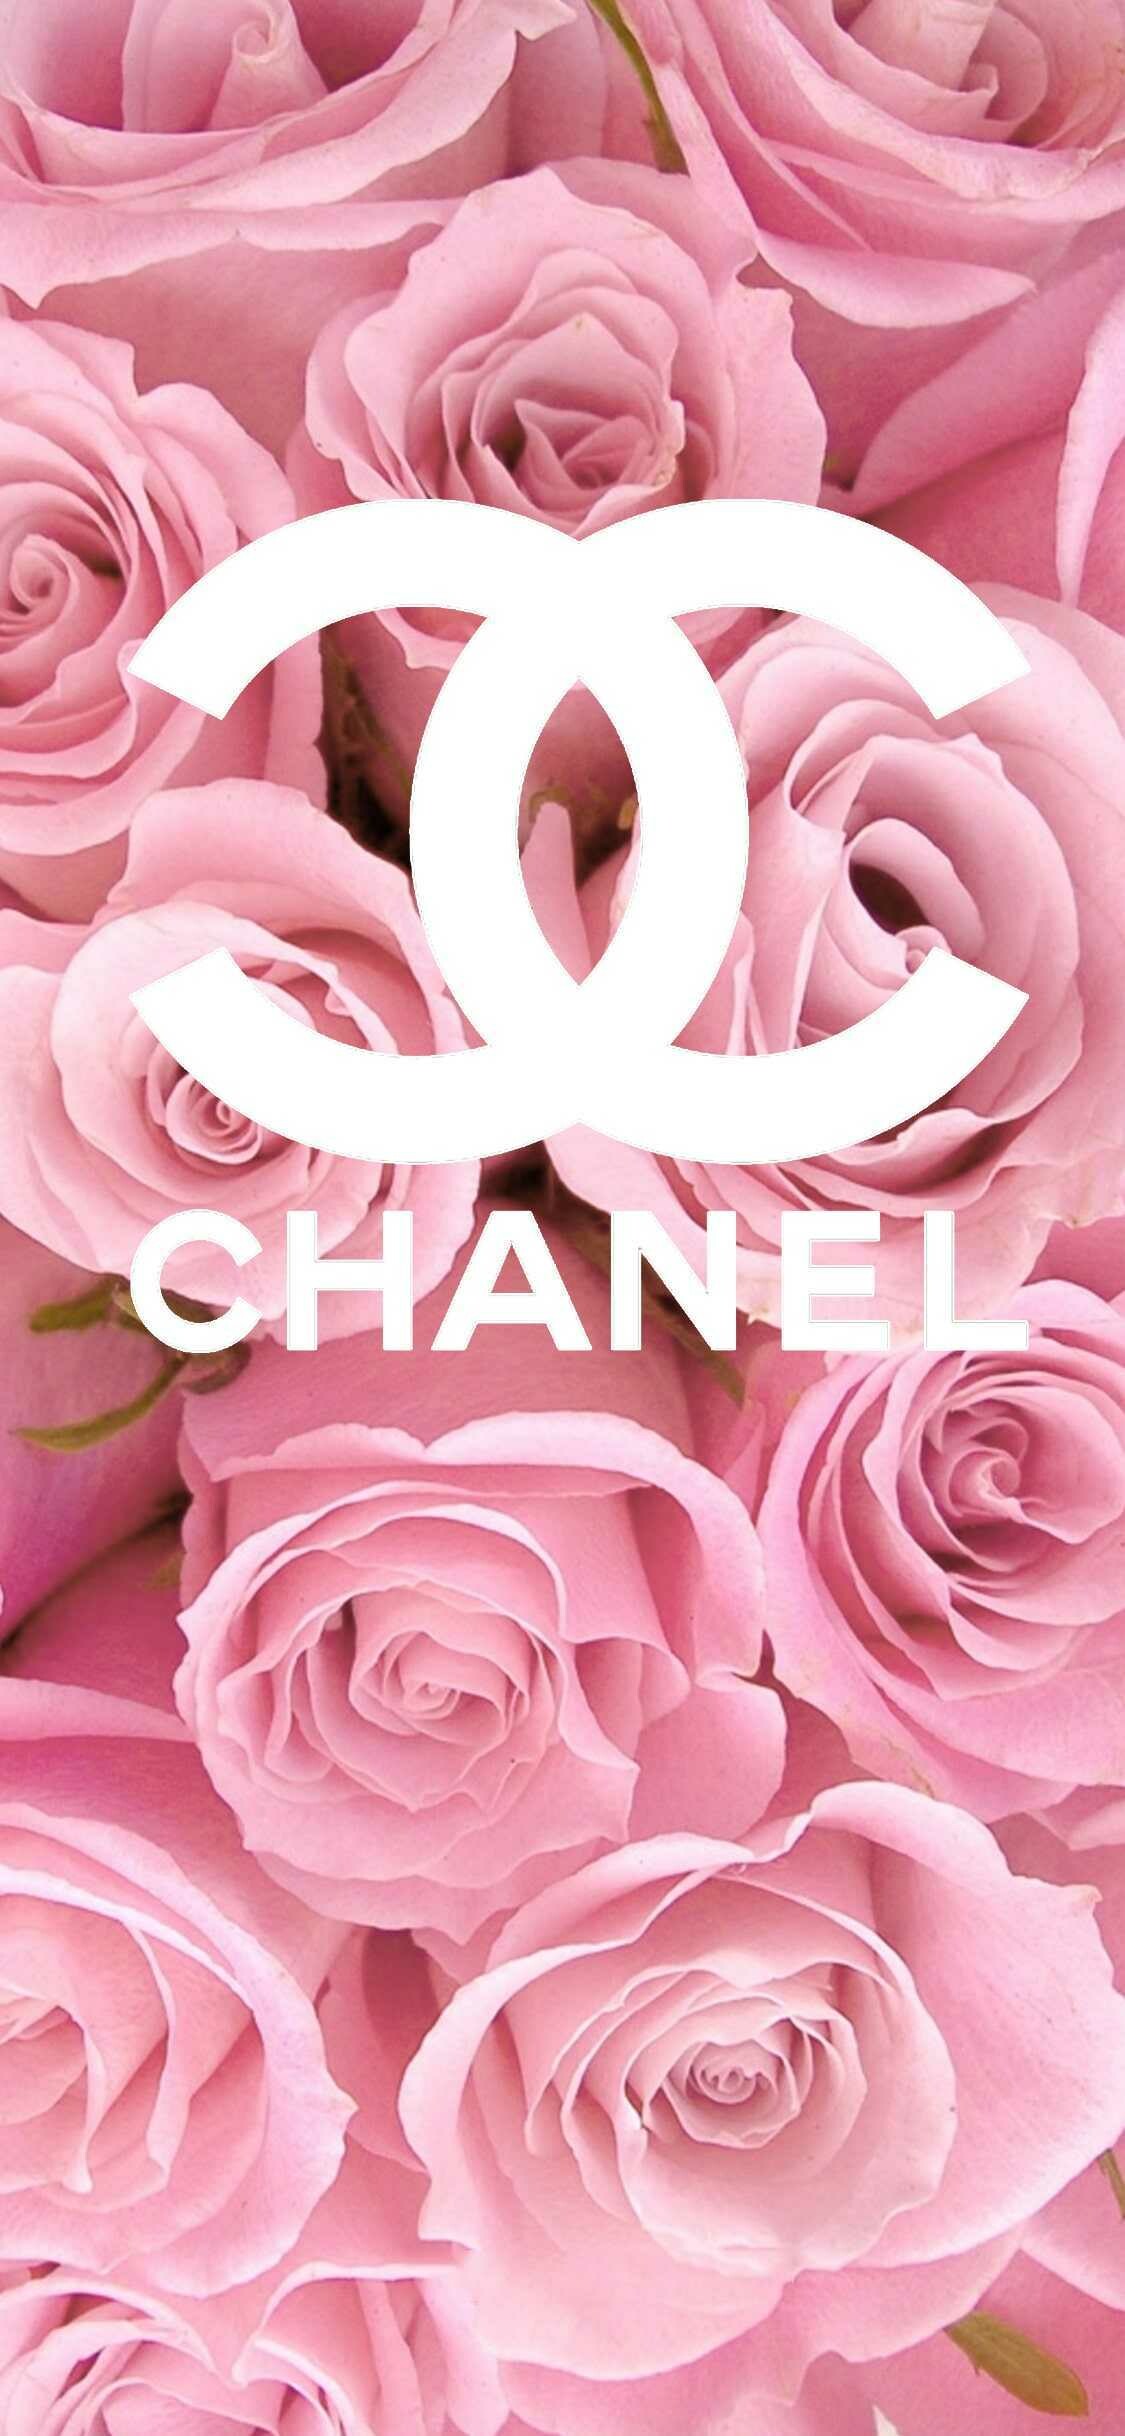 Chanel in 4K, Ultra high resolution, Crystal clear, Exquisite details, 1130x2440 HD Phone